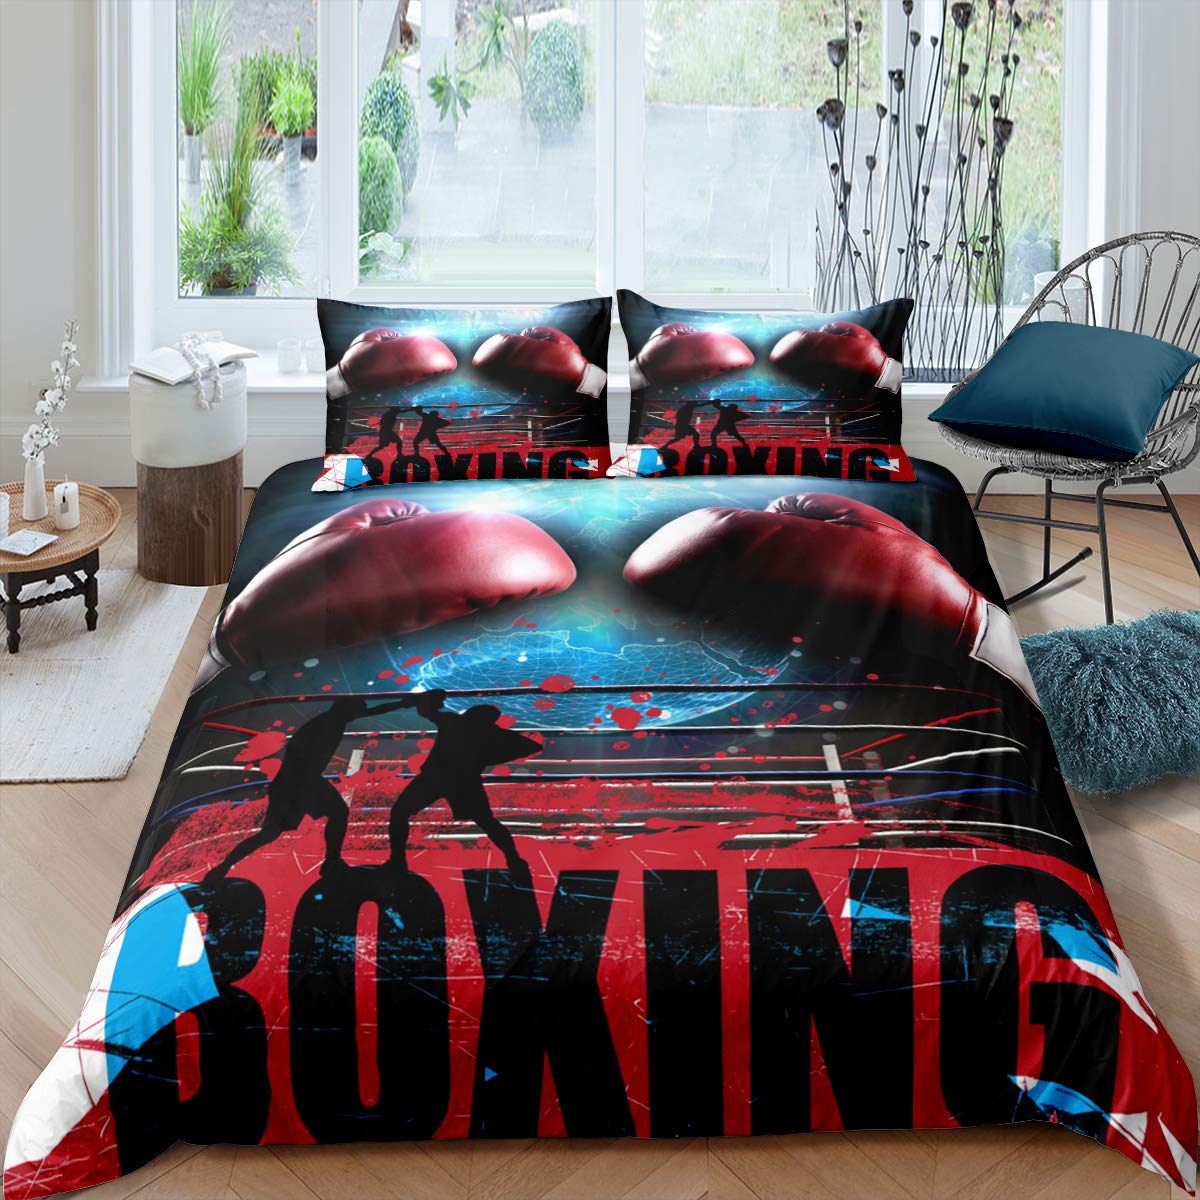 Erosebridal Adult Boxing Duvet Cover Twin Size, Sports Games Theme Bedding Set Boxing Gloves Quilt Cover, Athlete Silhouette Pattern Comforter Cove...